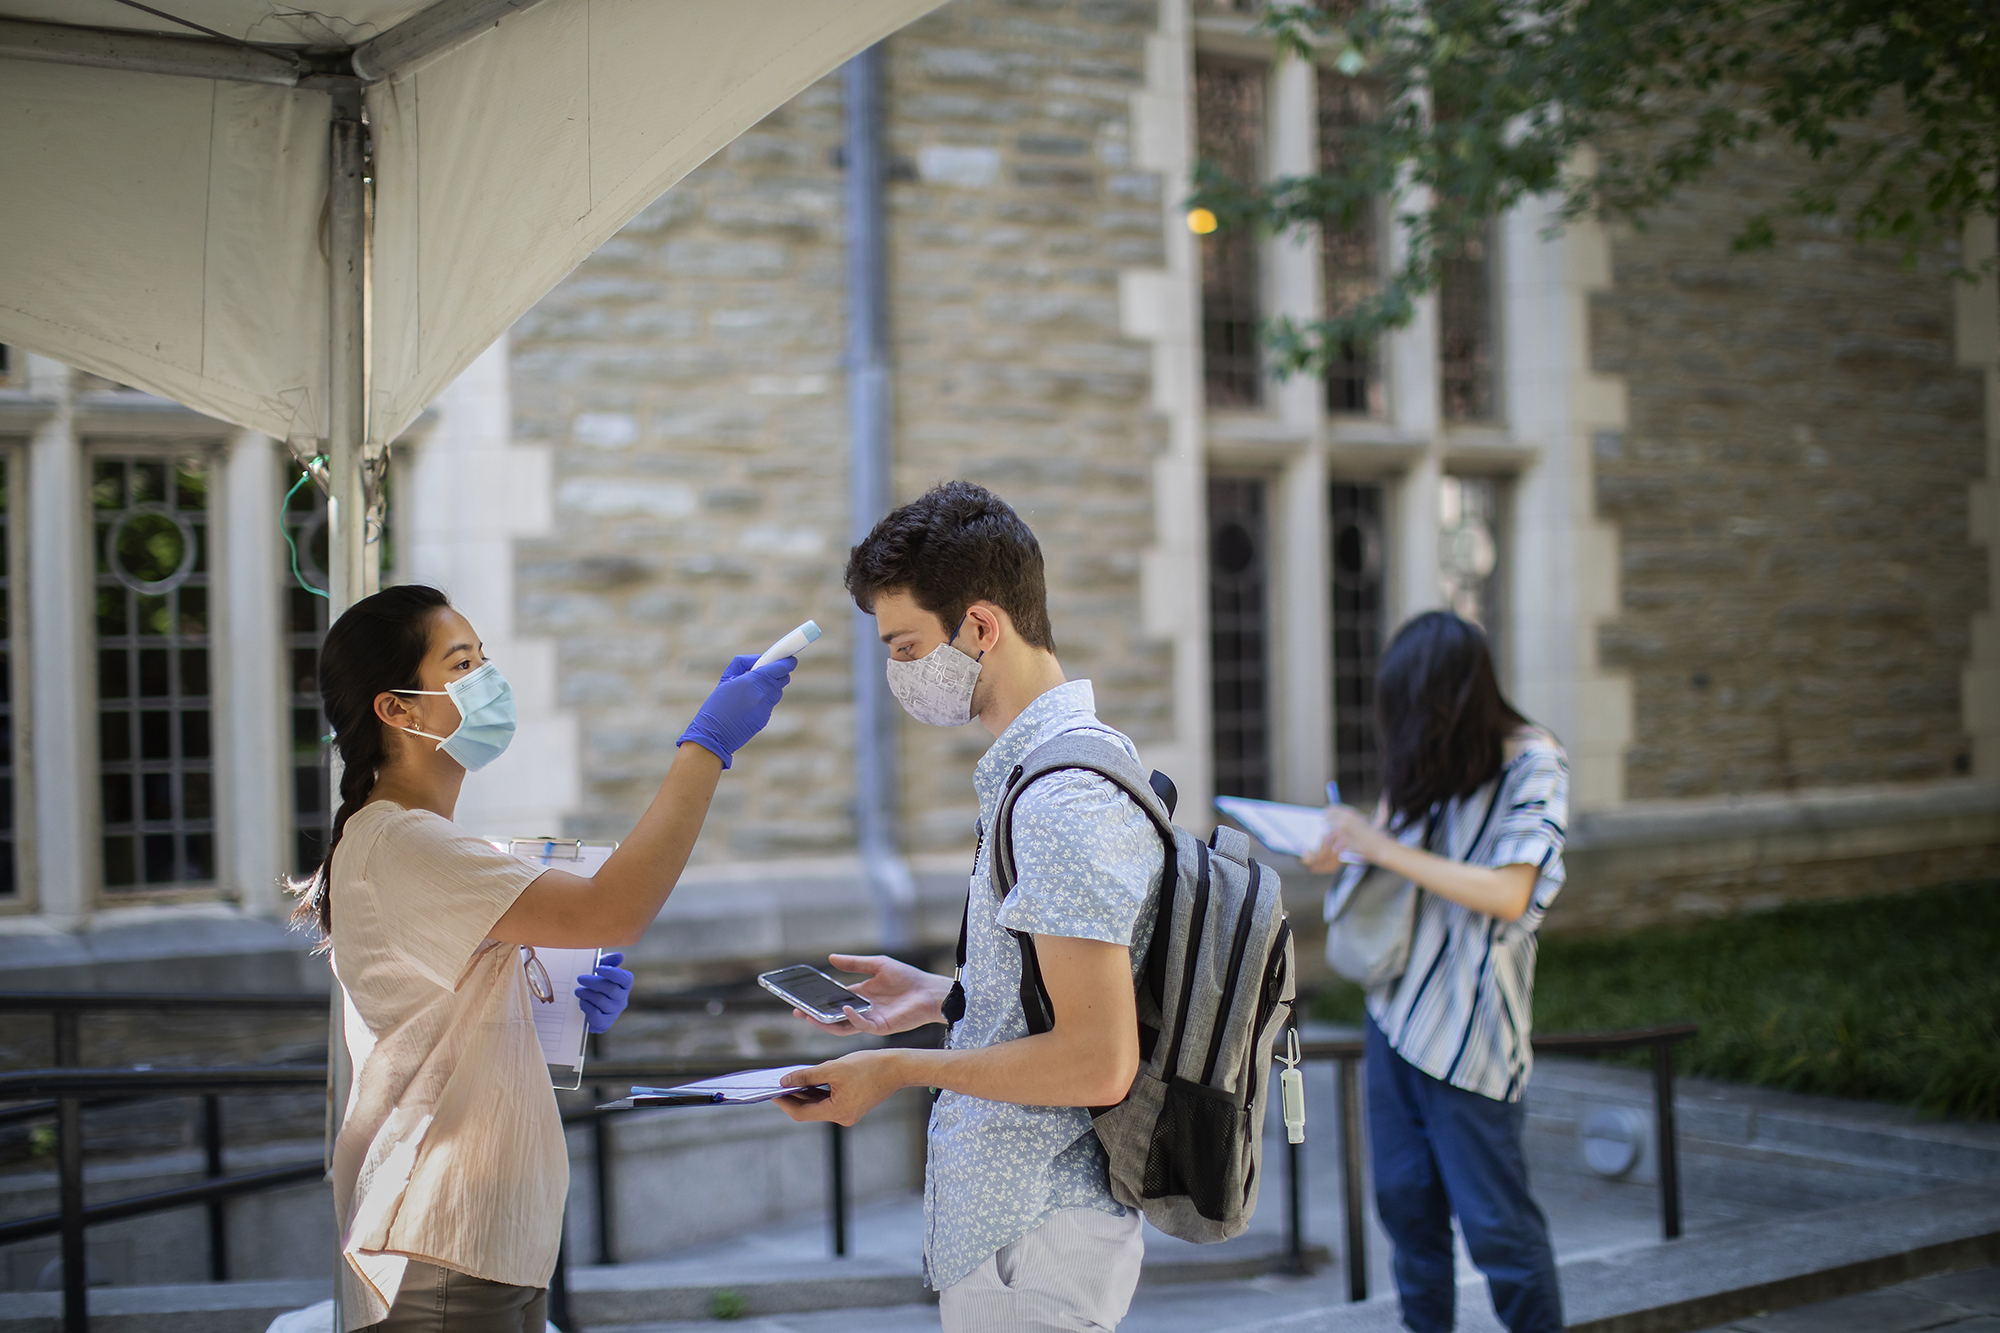 Student volunteer wearing a face mask scans the temperature of a masked Penn student outdoors on campus.